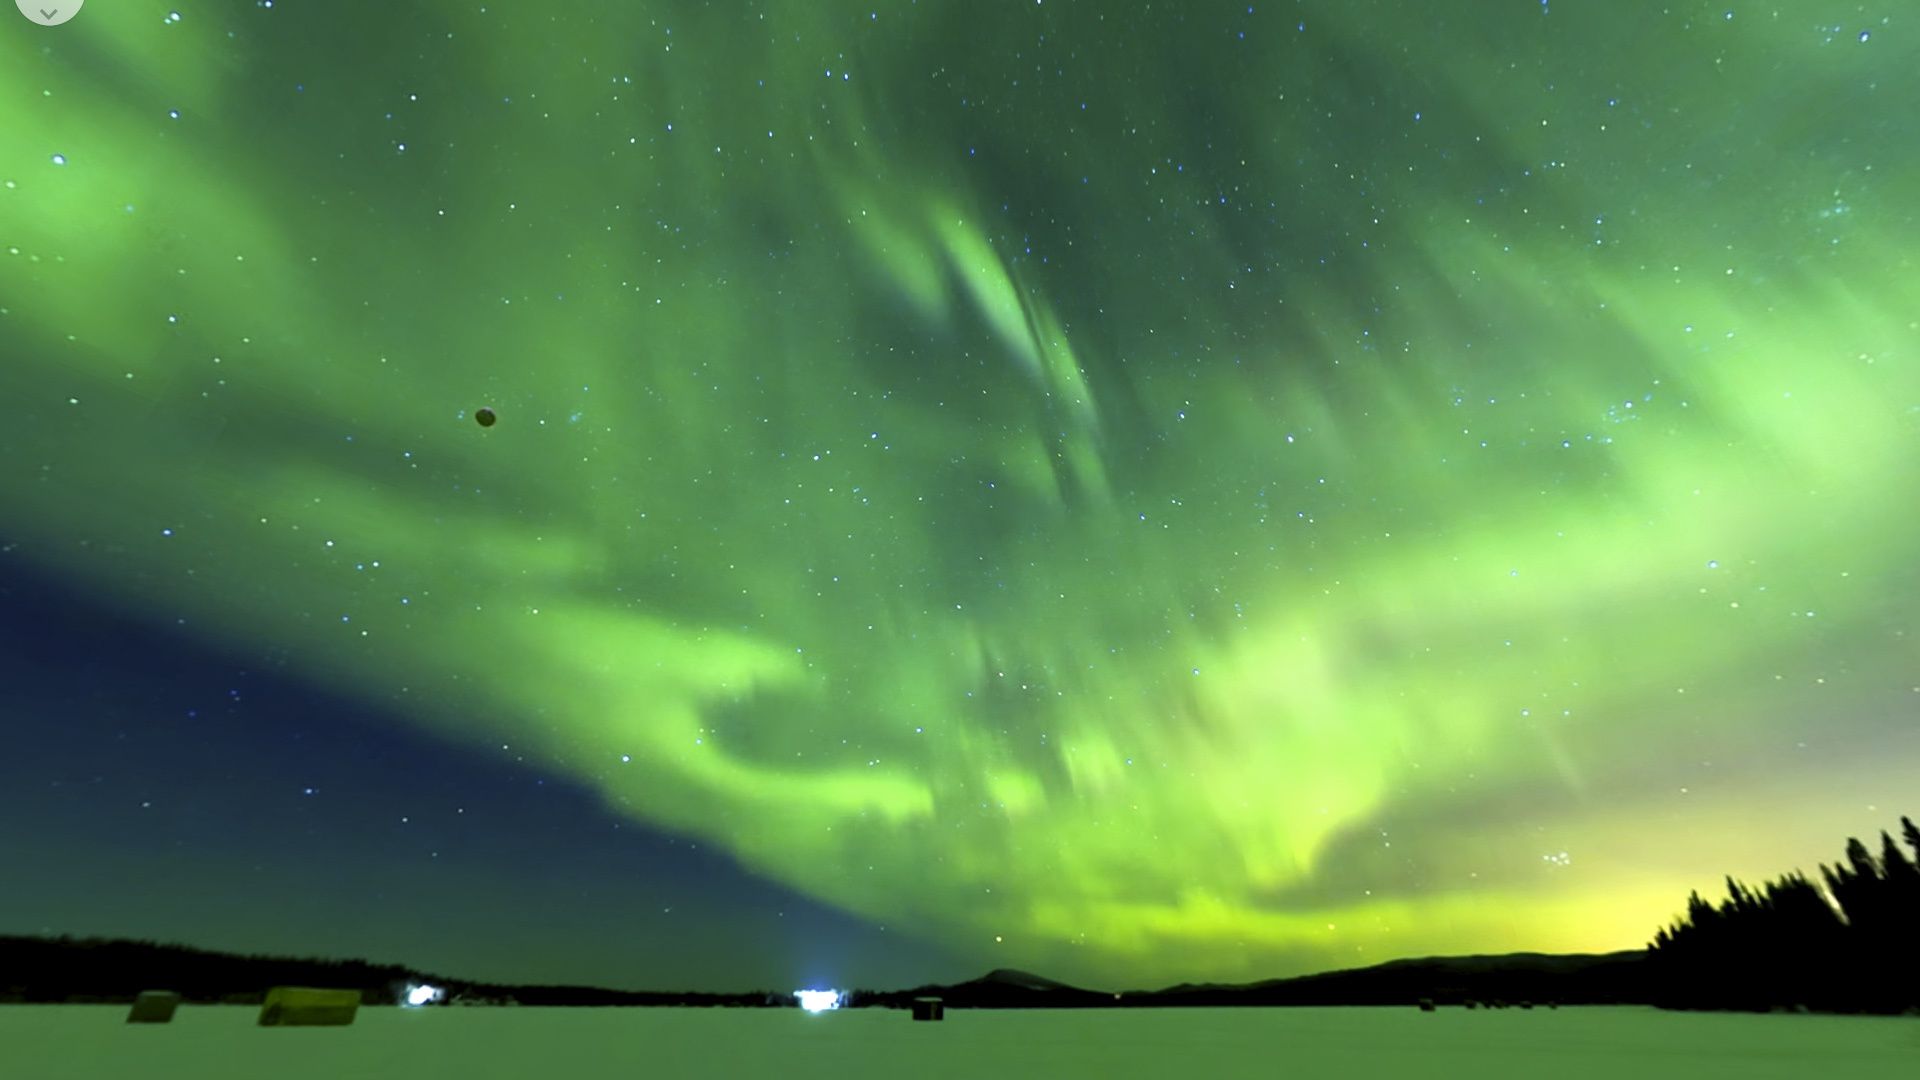 This beautiful 8K 360° timelapse shows the Aurora Borealis during a total lunar eclipse